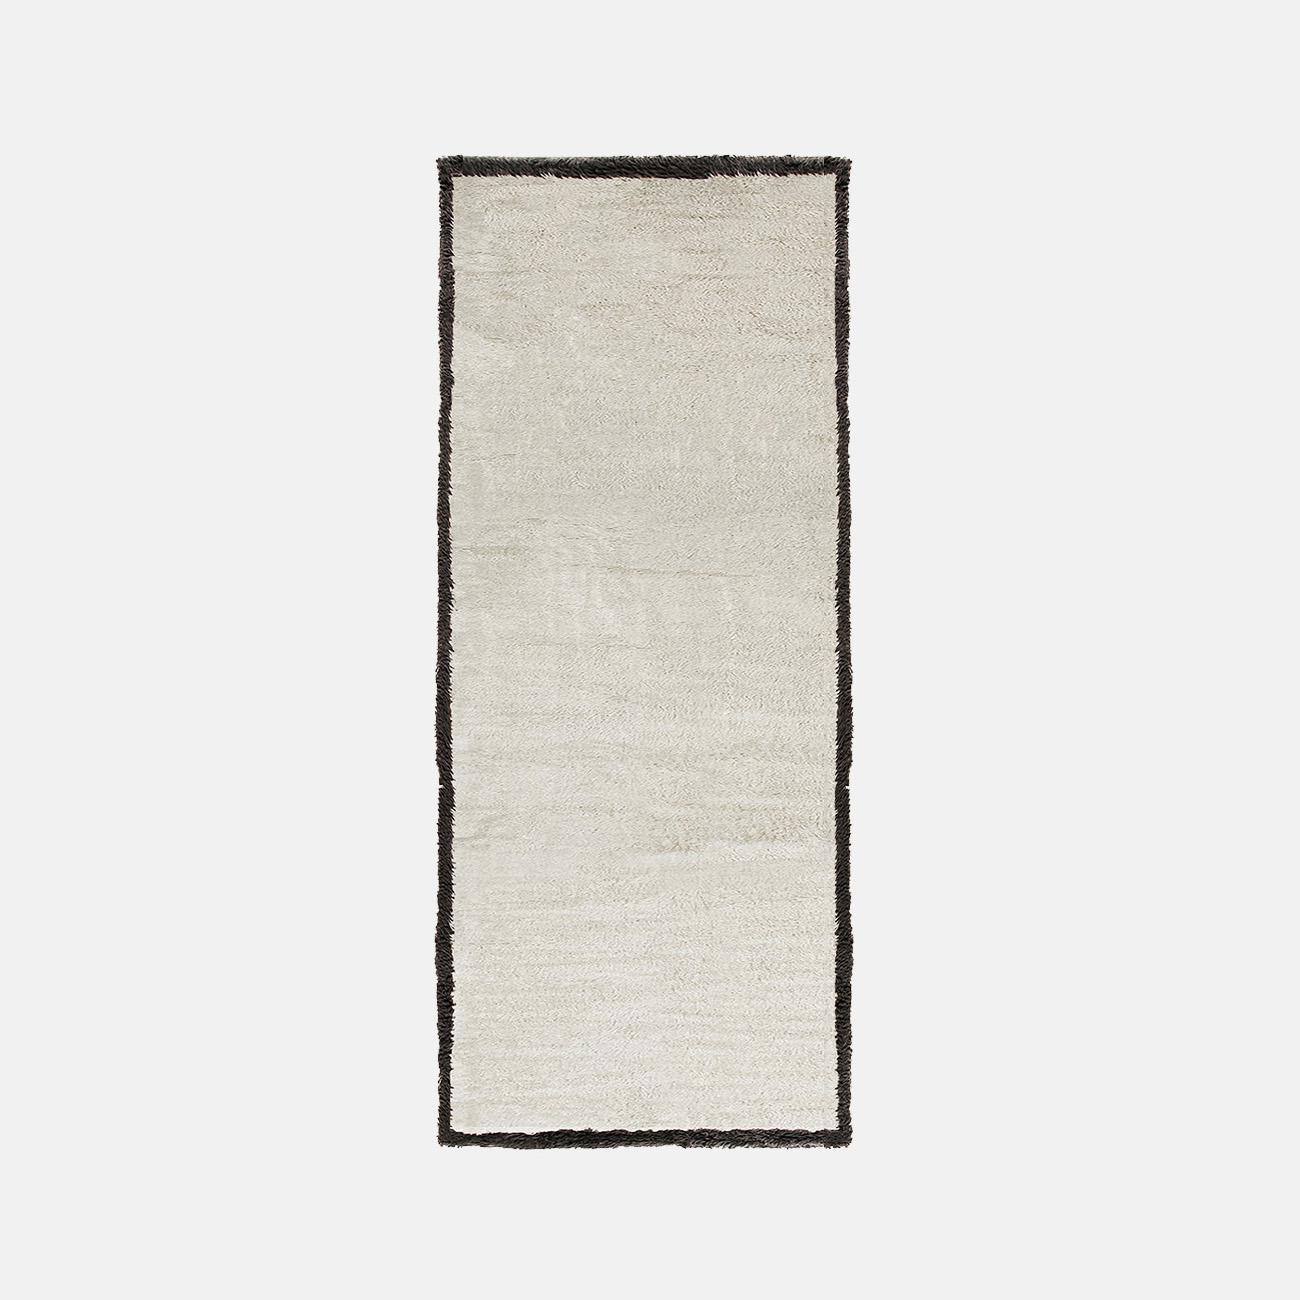 Swedish Kimoto Frame Mauro Night Edit Runner Rug by Atelier Bowy C.D. For Sale